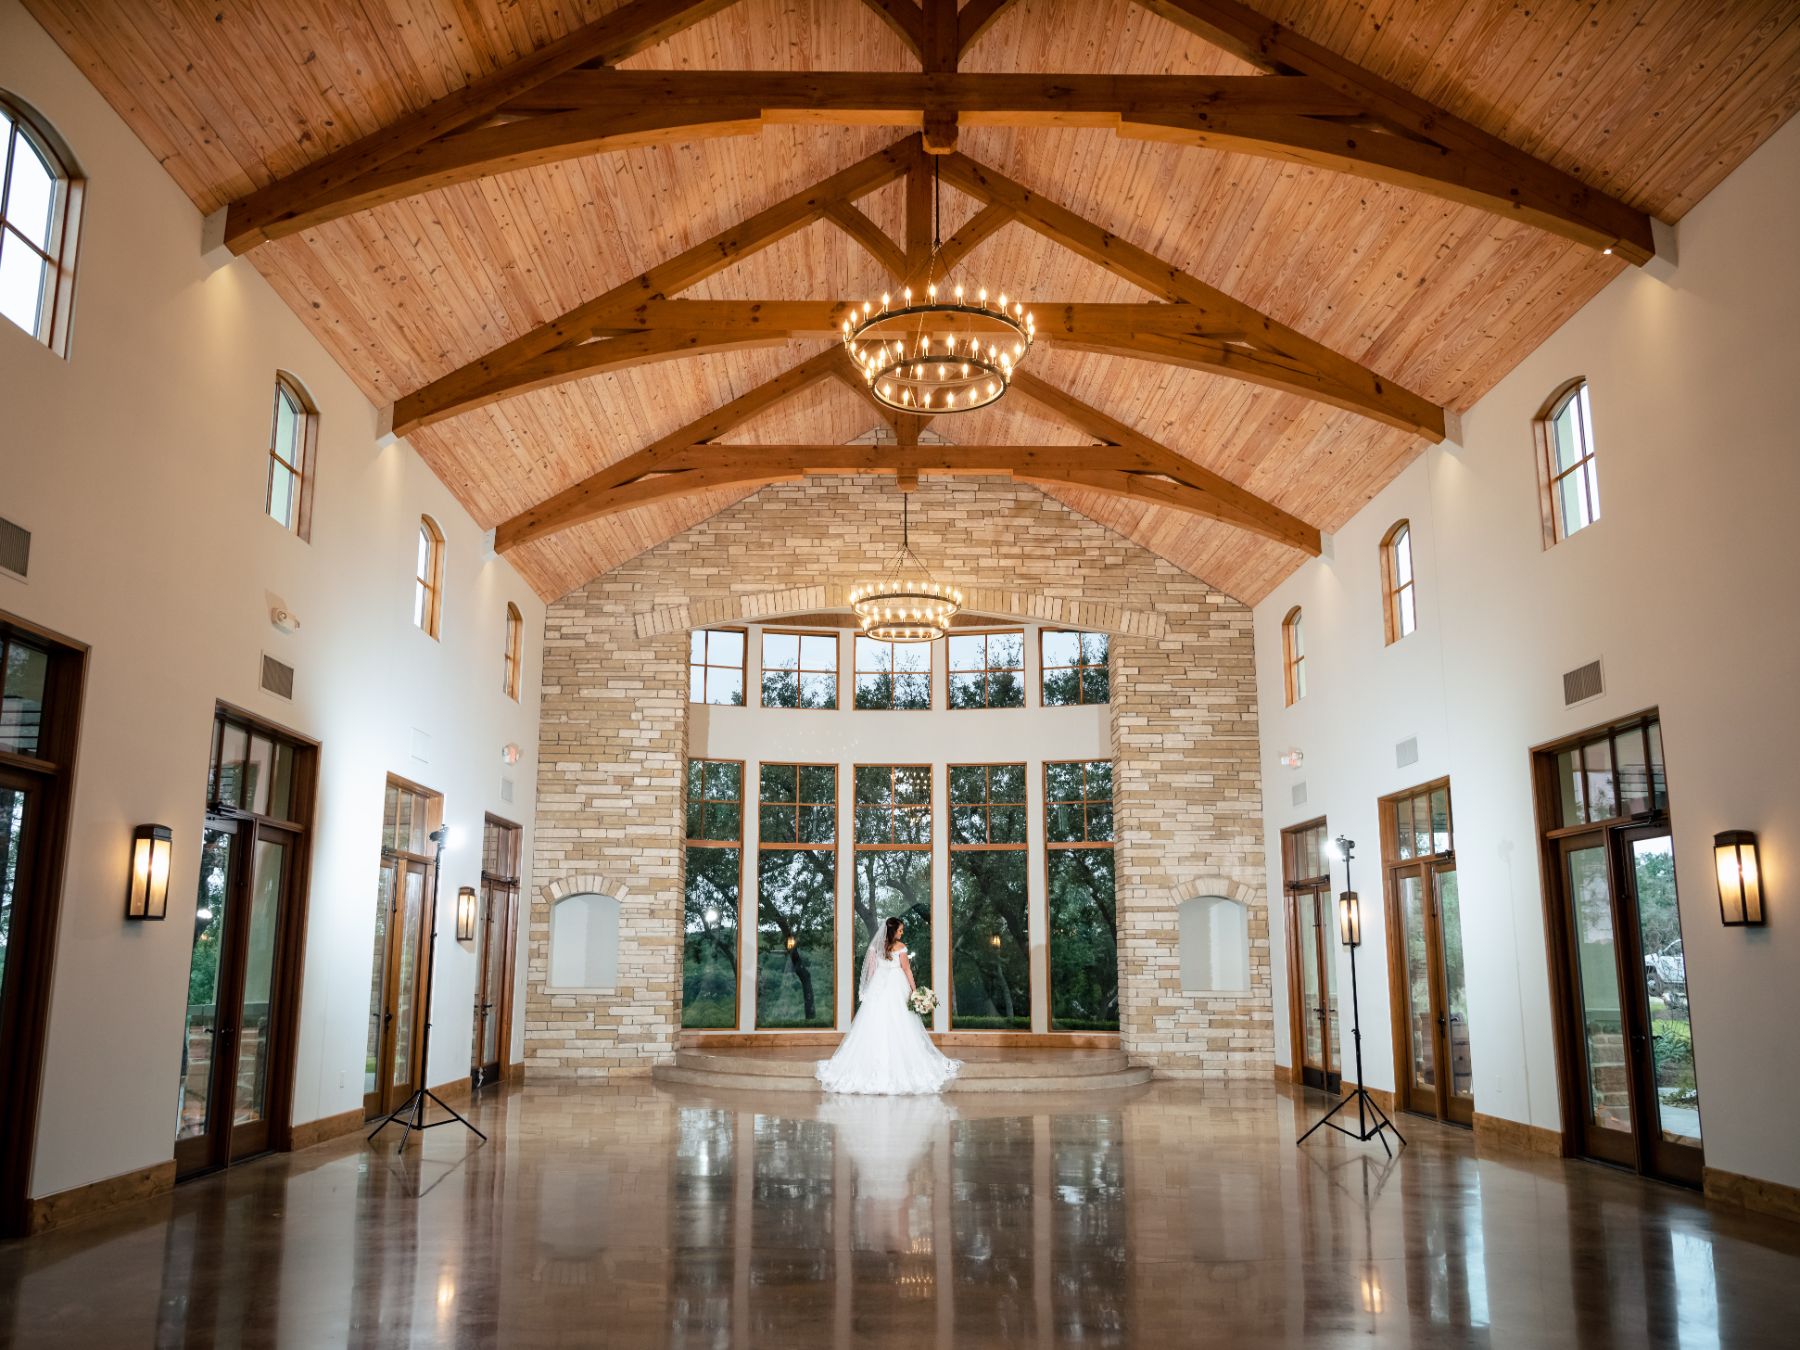 Fried poses inside Canyonwood Ridge wedding chapel with exposed wood beams, and a stone wall